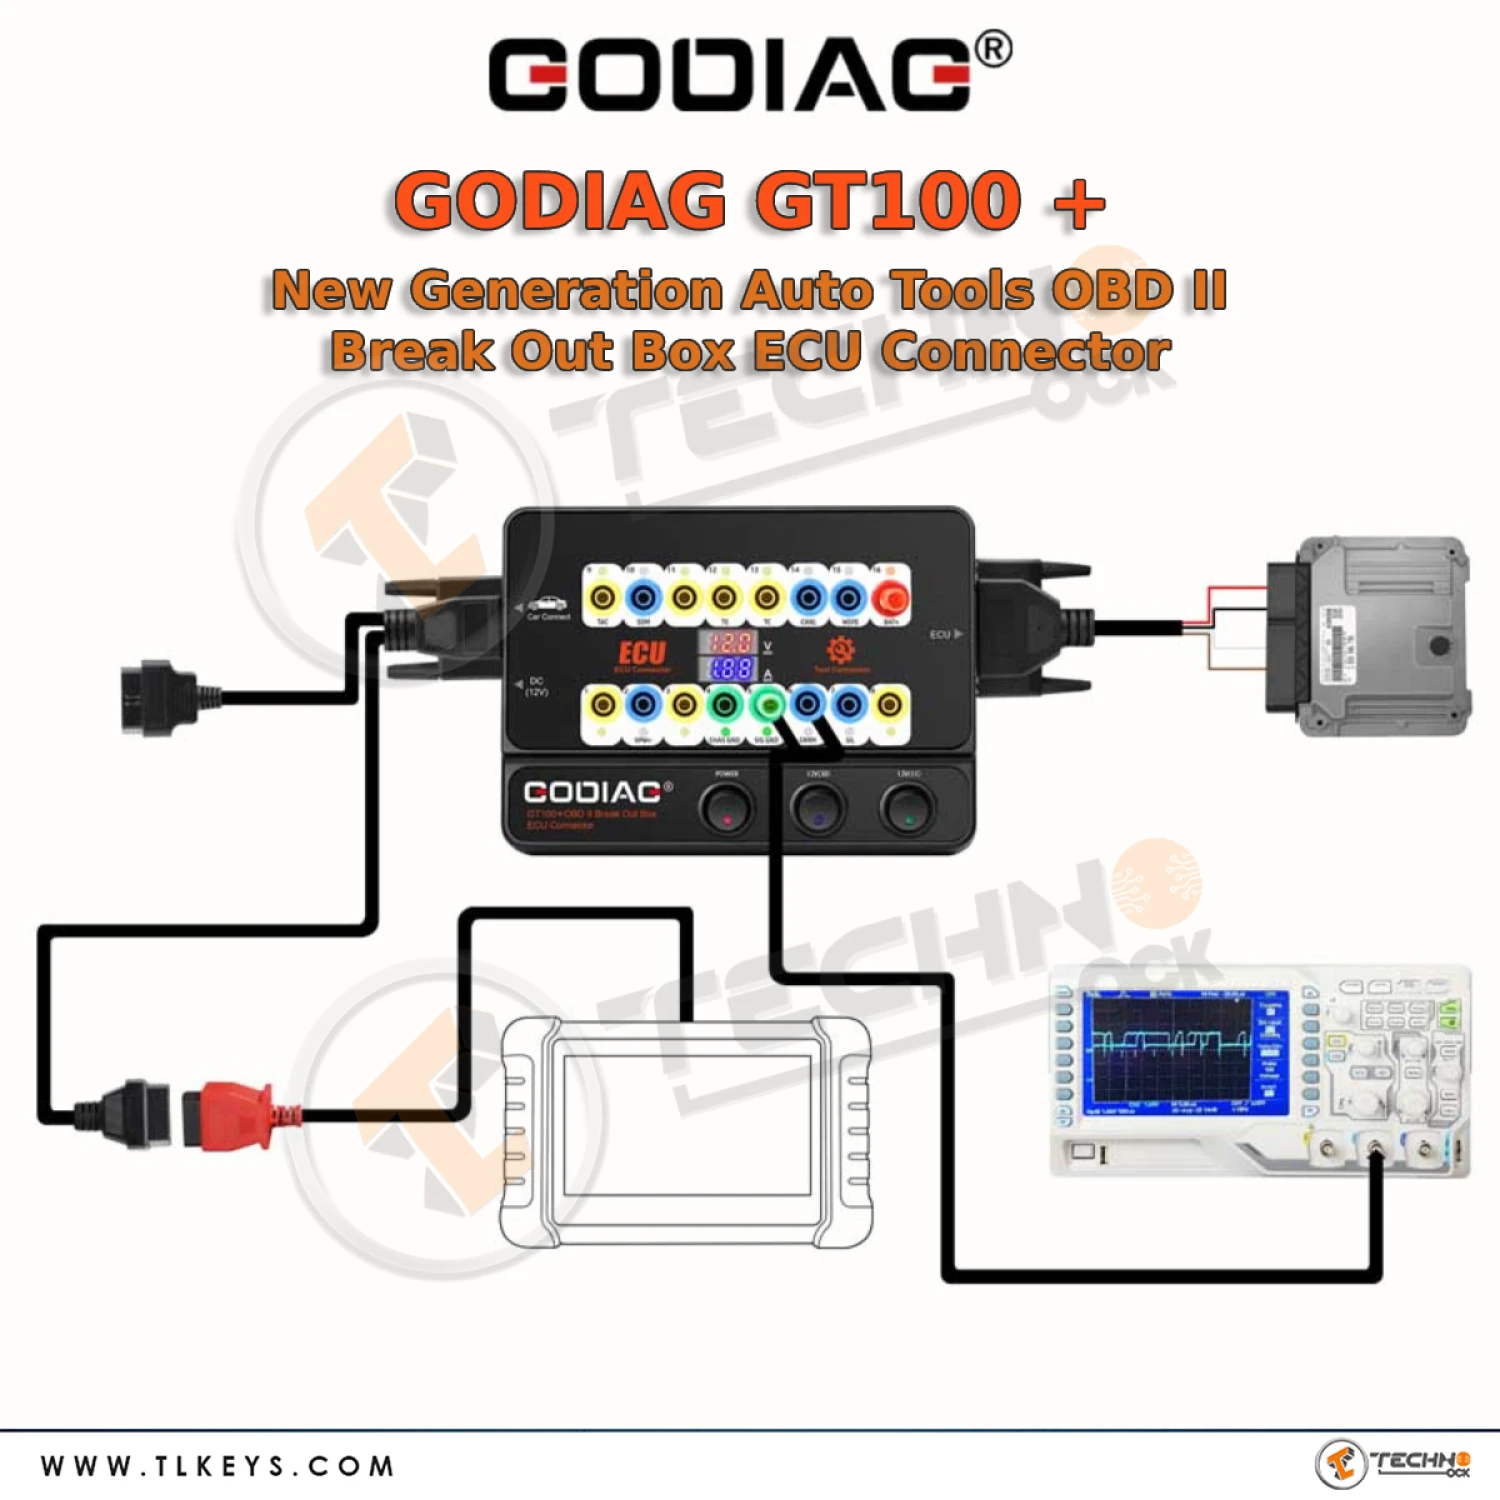 GODIAG GT100 Quickly communicate with a single ECU on bench